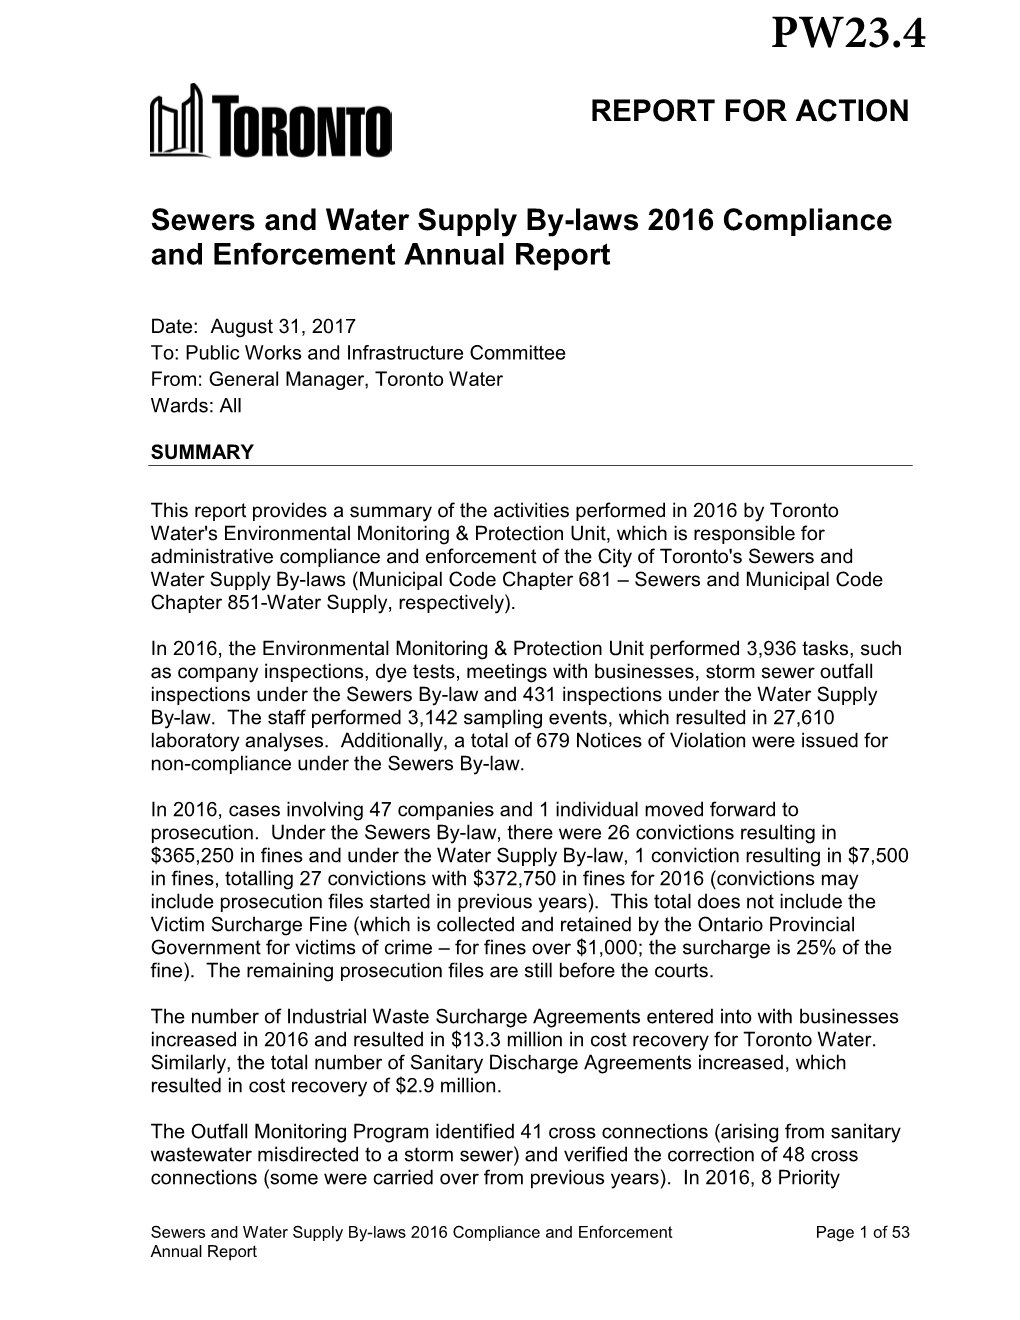 Sewers and Water Supply By-Laws 2016 Compliance and Enforcement Annual Report